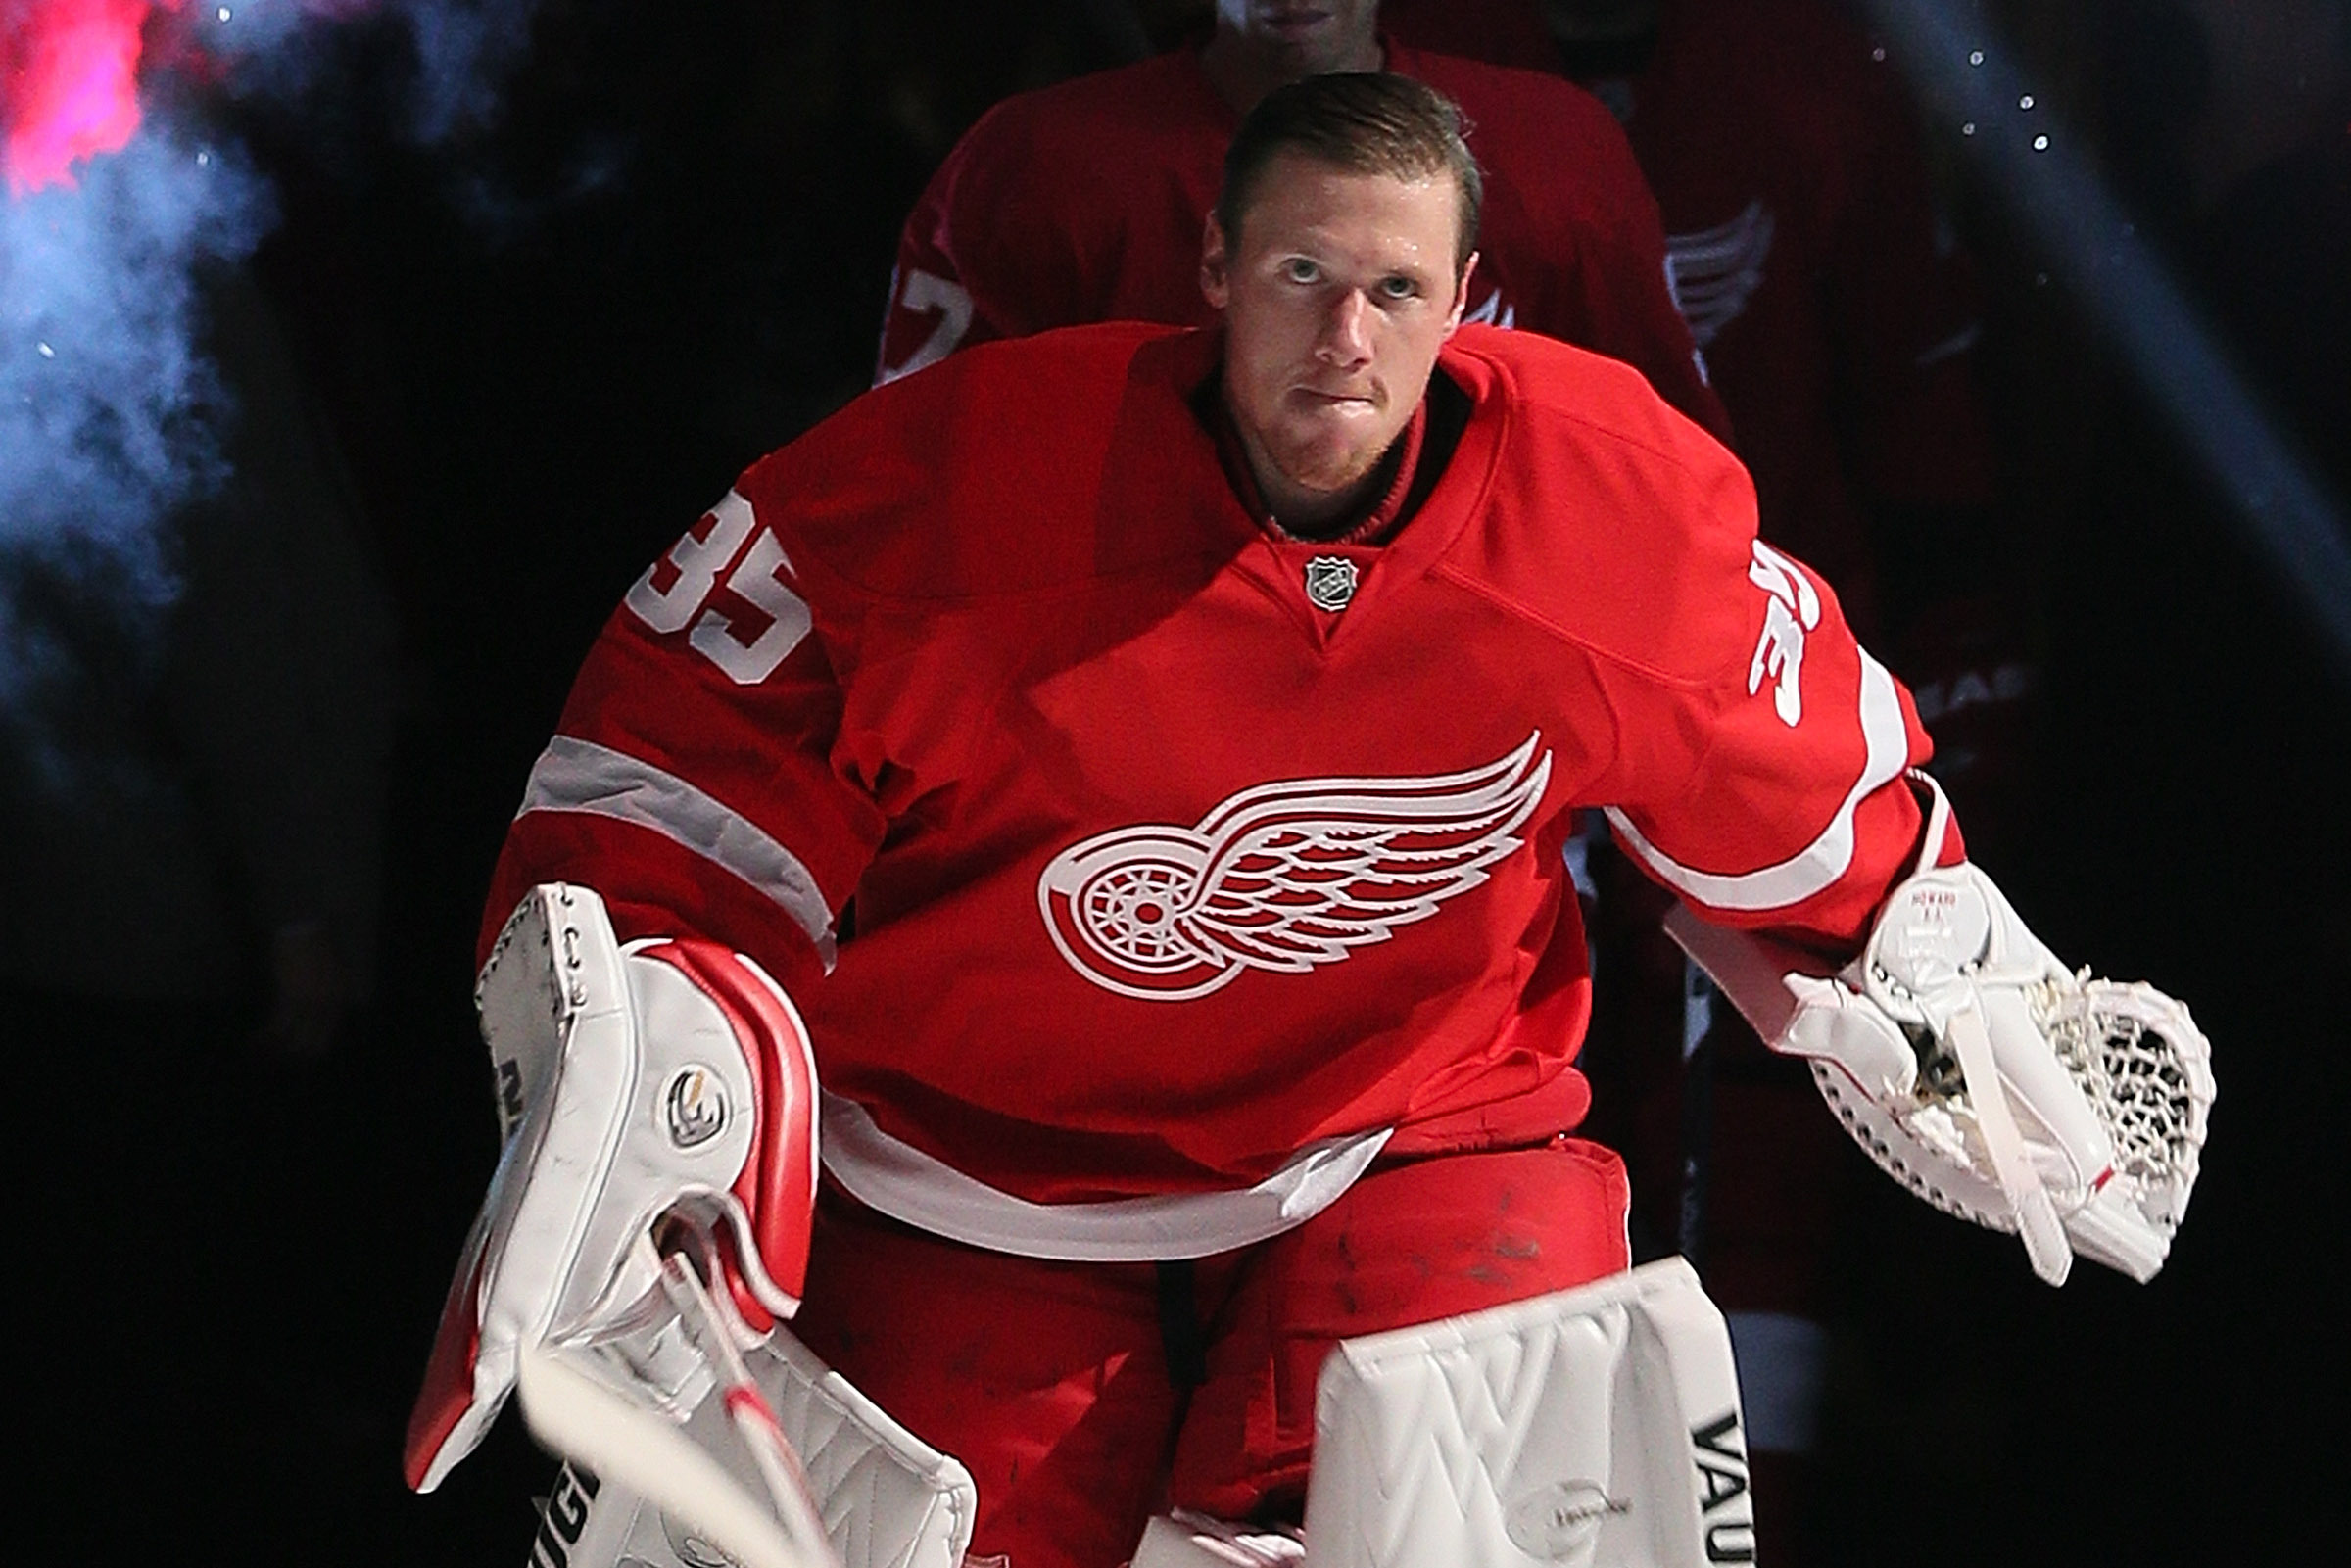 Bally Sports Detroit on X: Let's all wish Jimmy Howard a happy